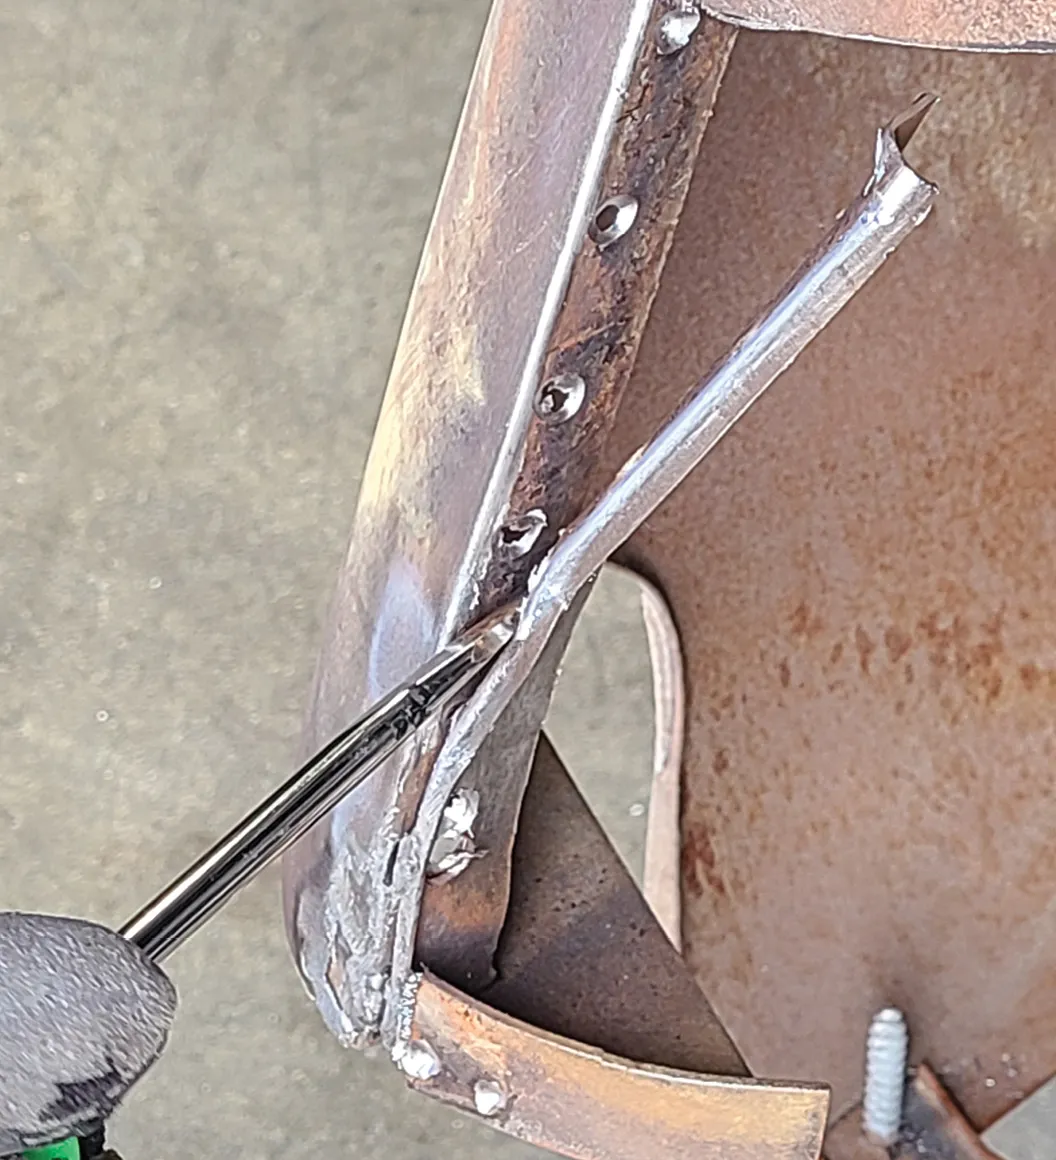 Once drilled out the spot welds can be popped apart with a screwdriver or, in some cases, a pneumatic chisel.